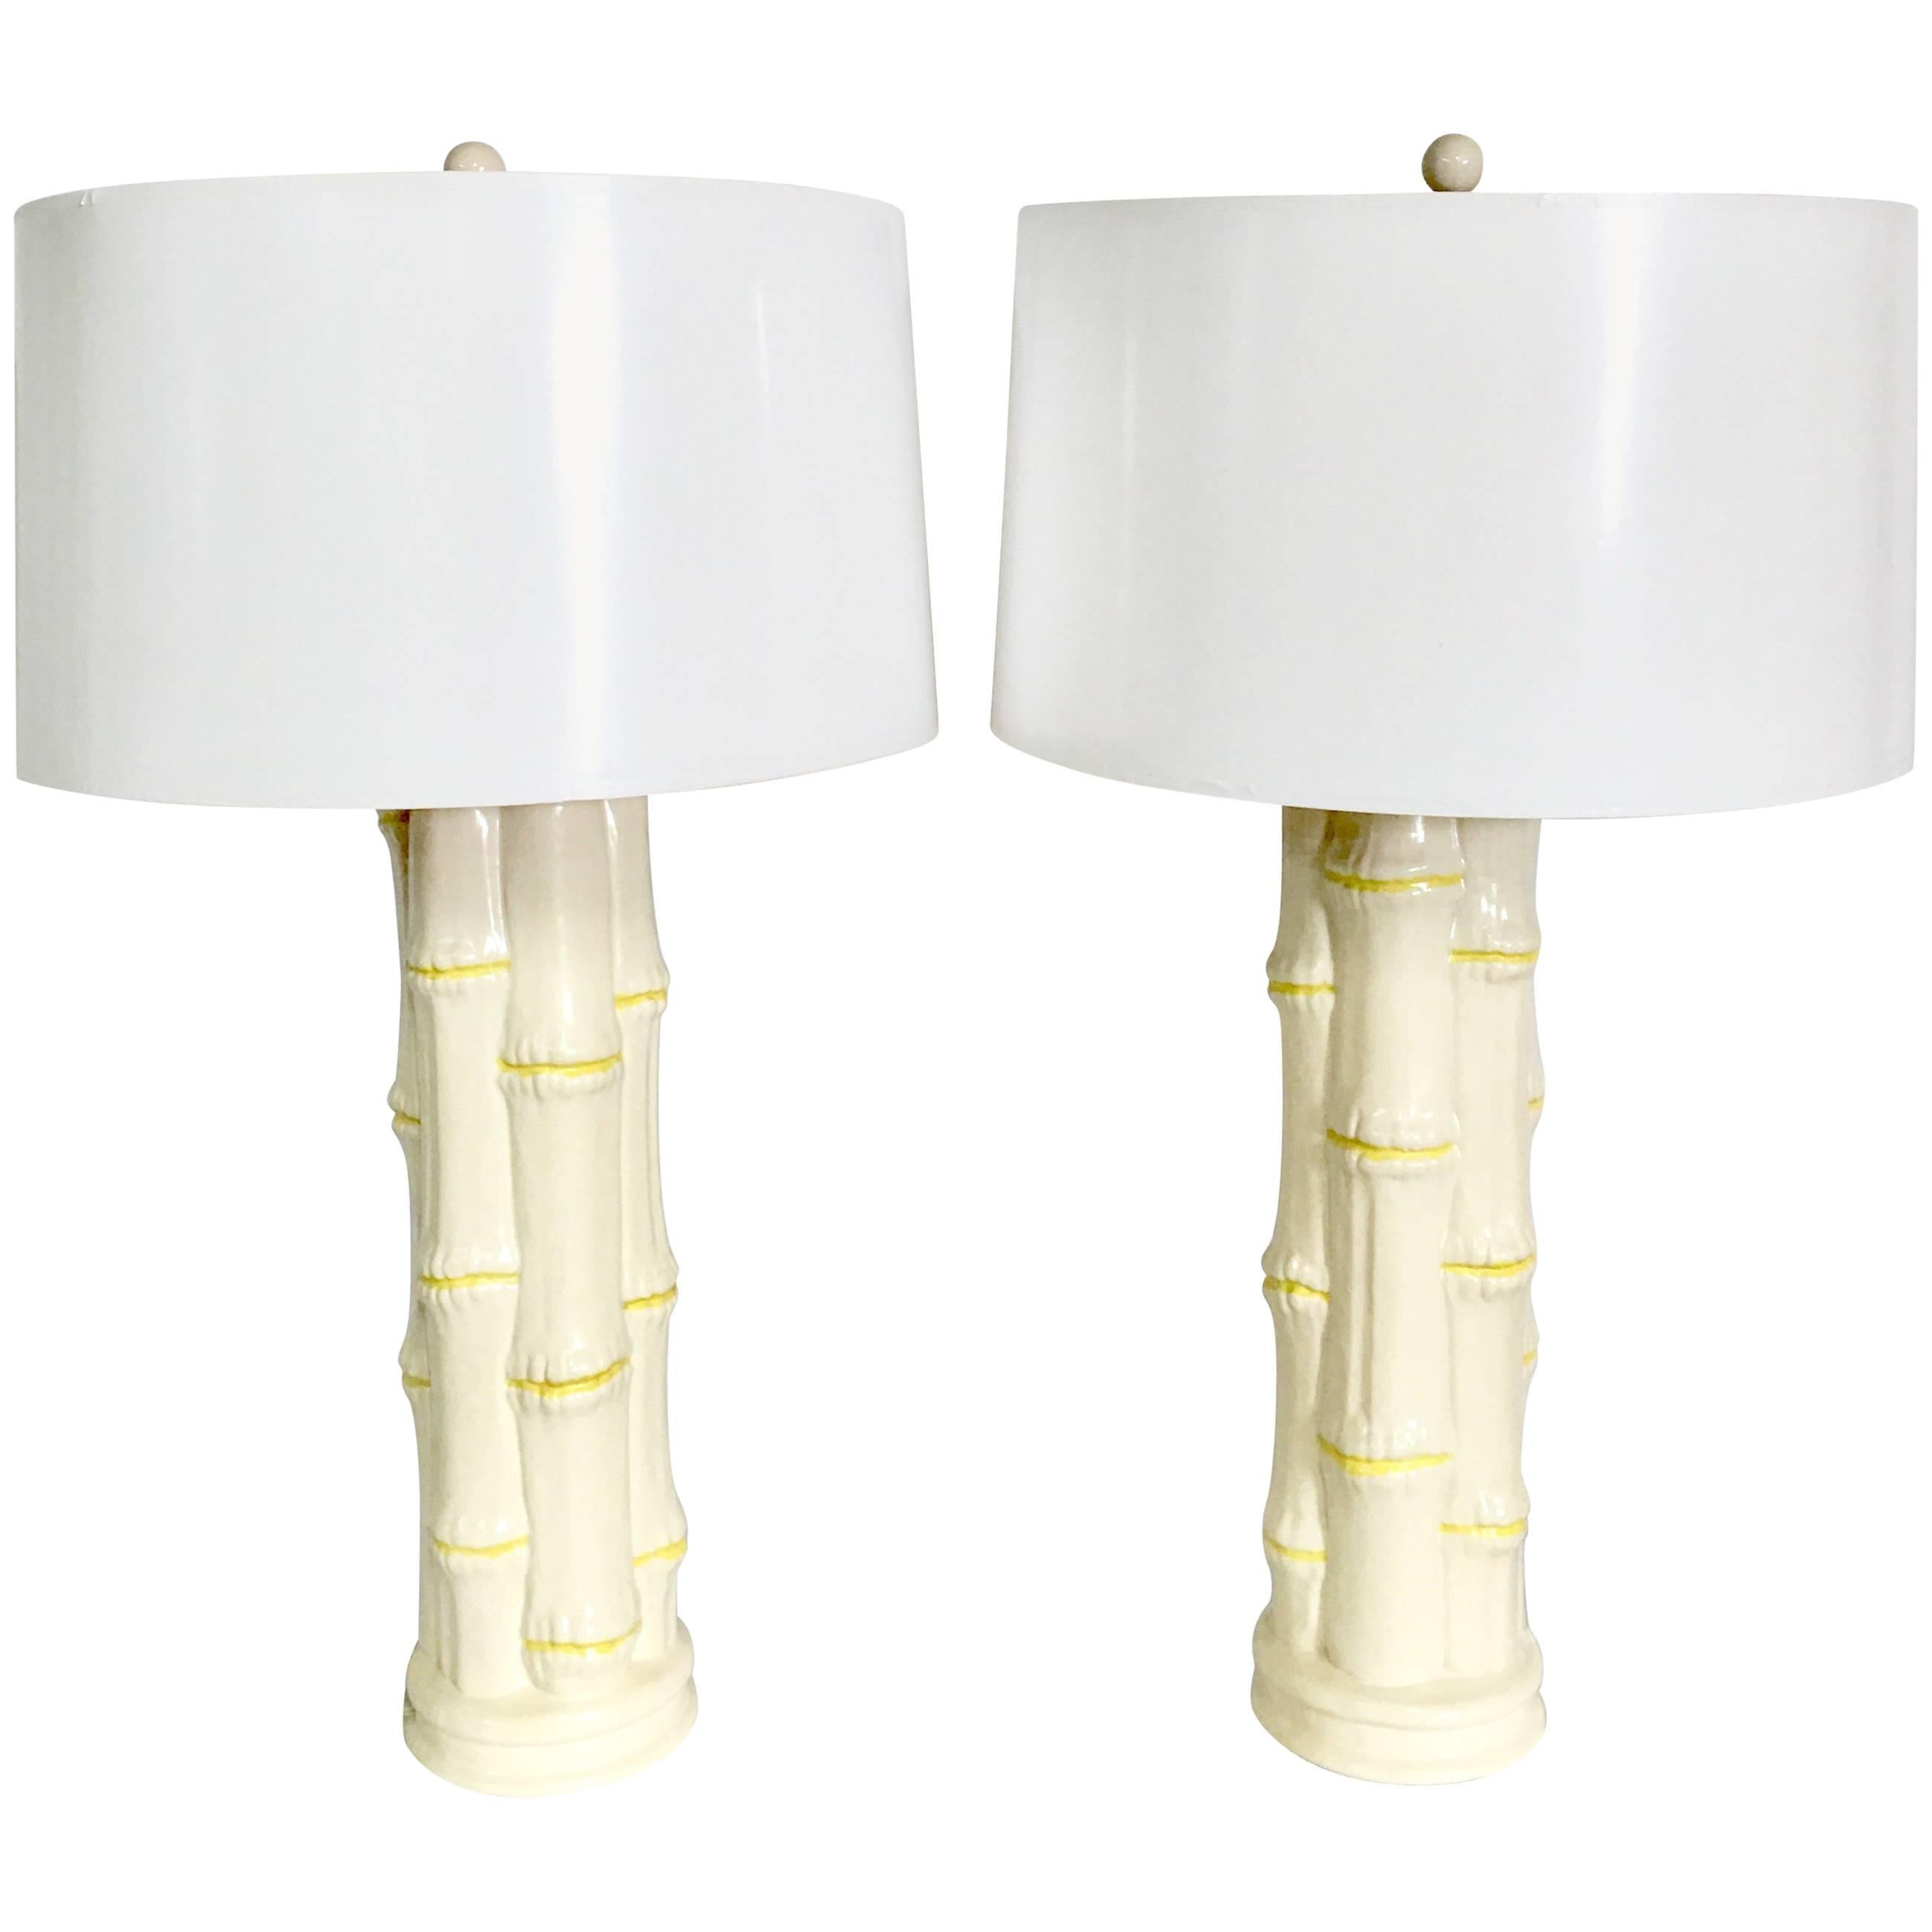 1960'S Pair Of Hollywood Regency Ceramic Glaze Faux-Bamboo Table Lamps